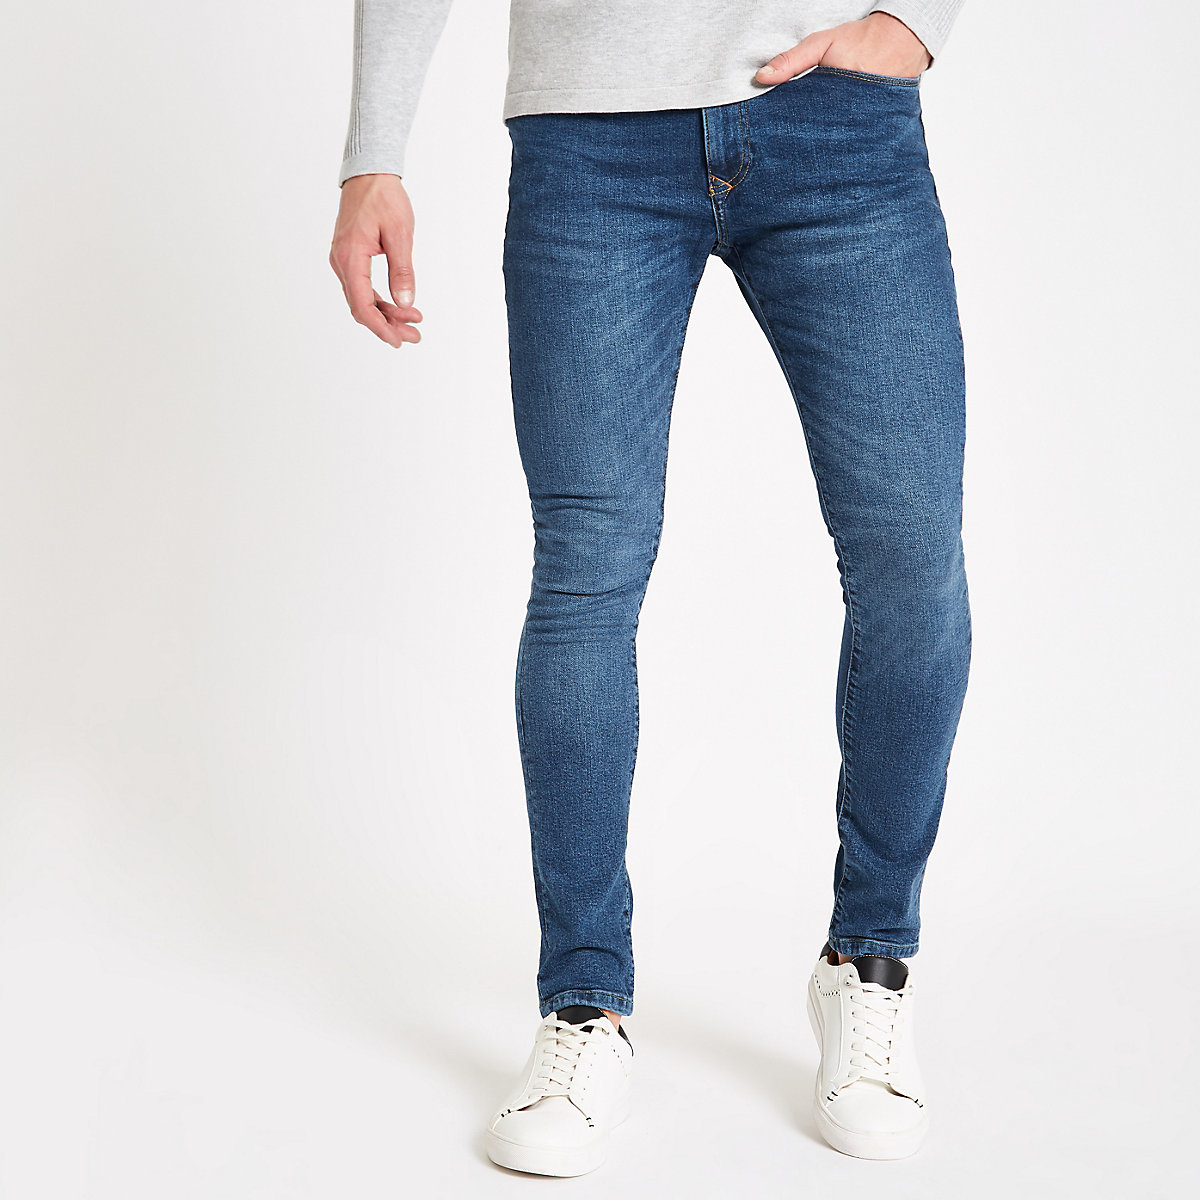 Jeans that men should have in their wardrobe for coming winter ...